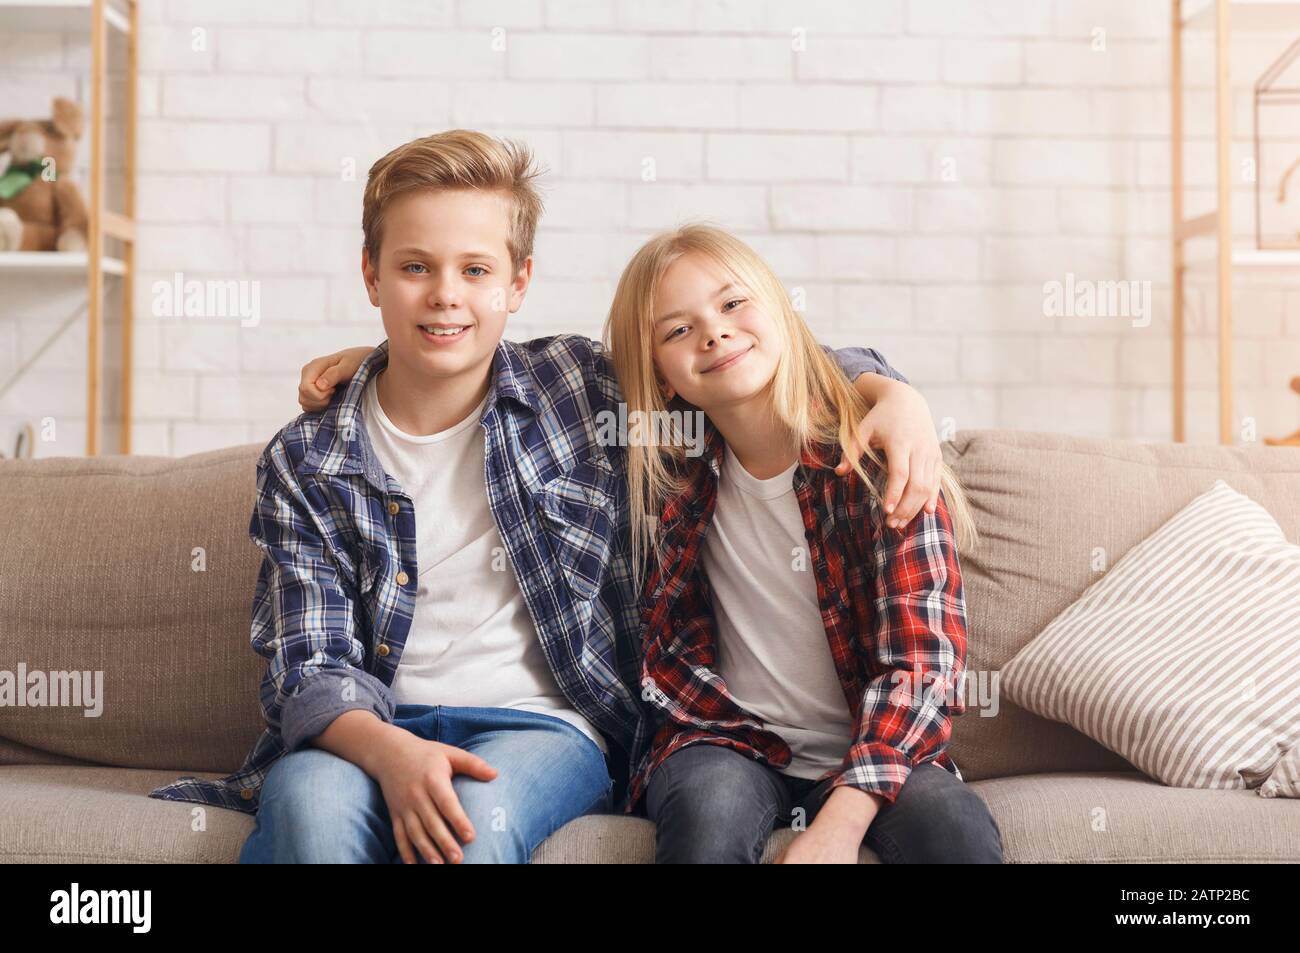 Brother And Sister Embracing Smiling Sitting On Couch At Home Stock Photo